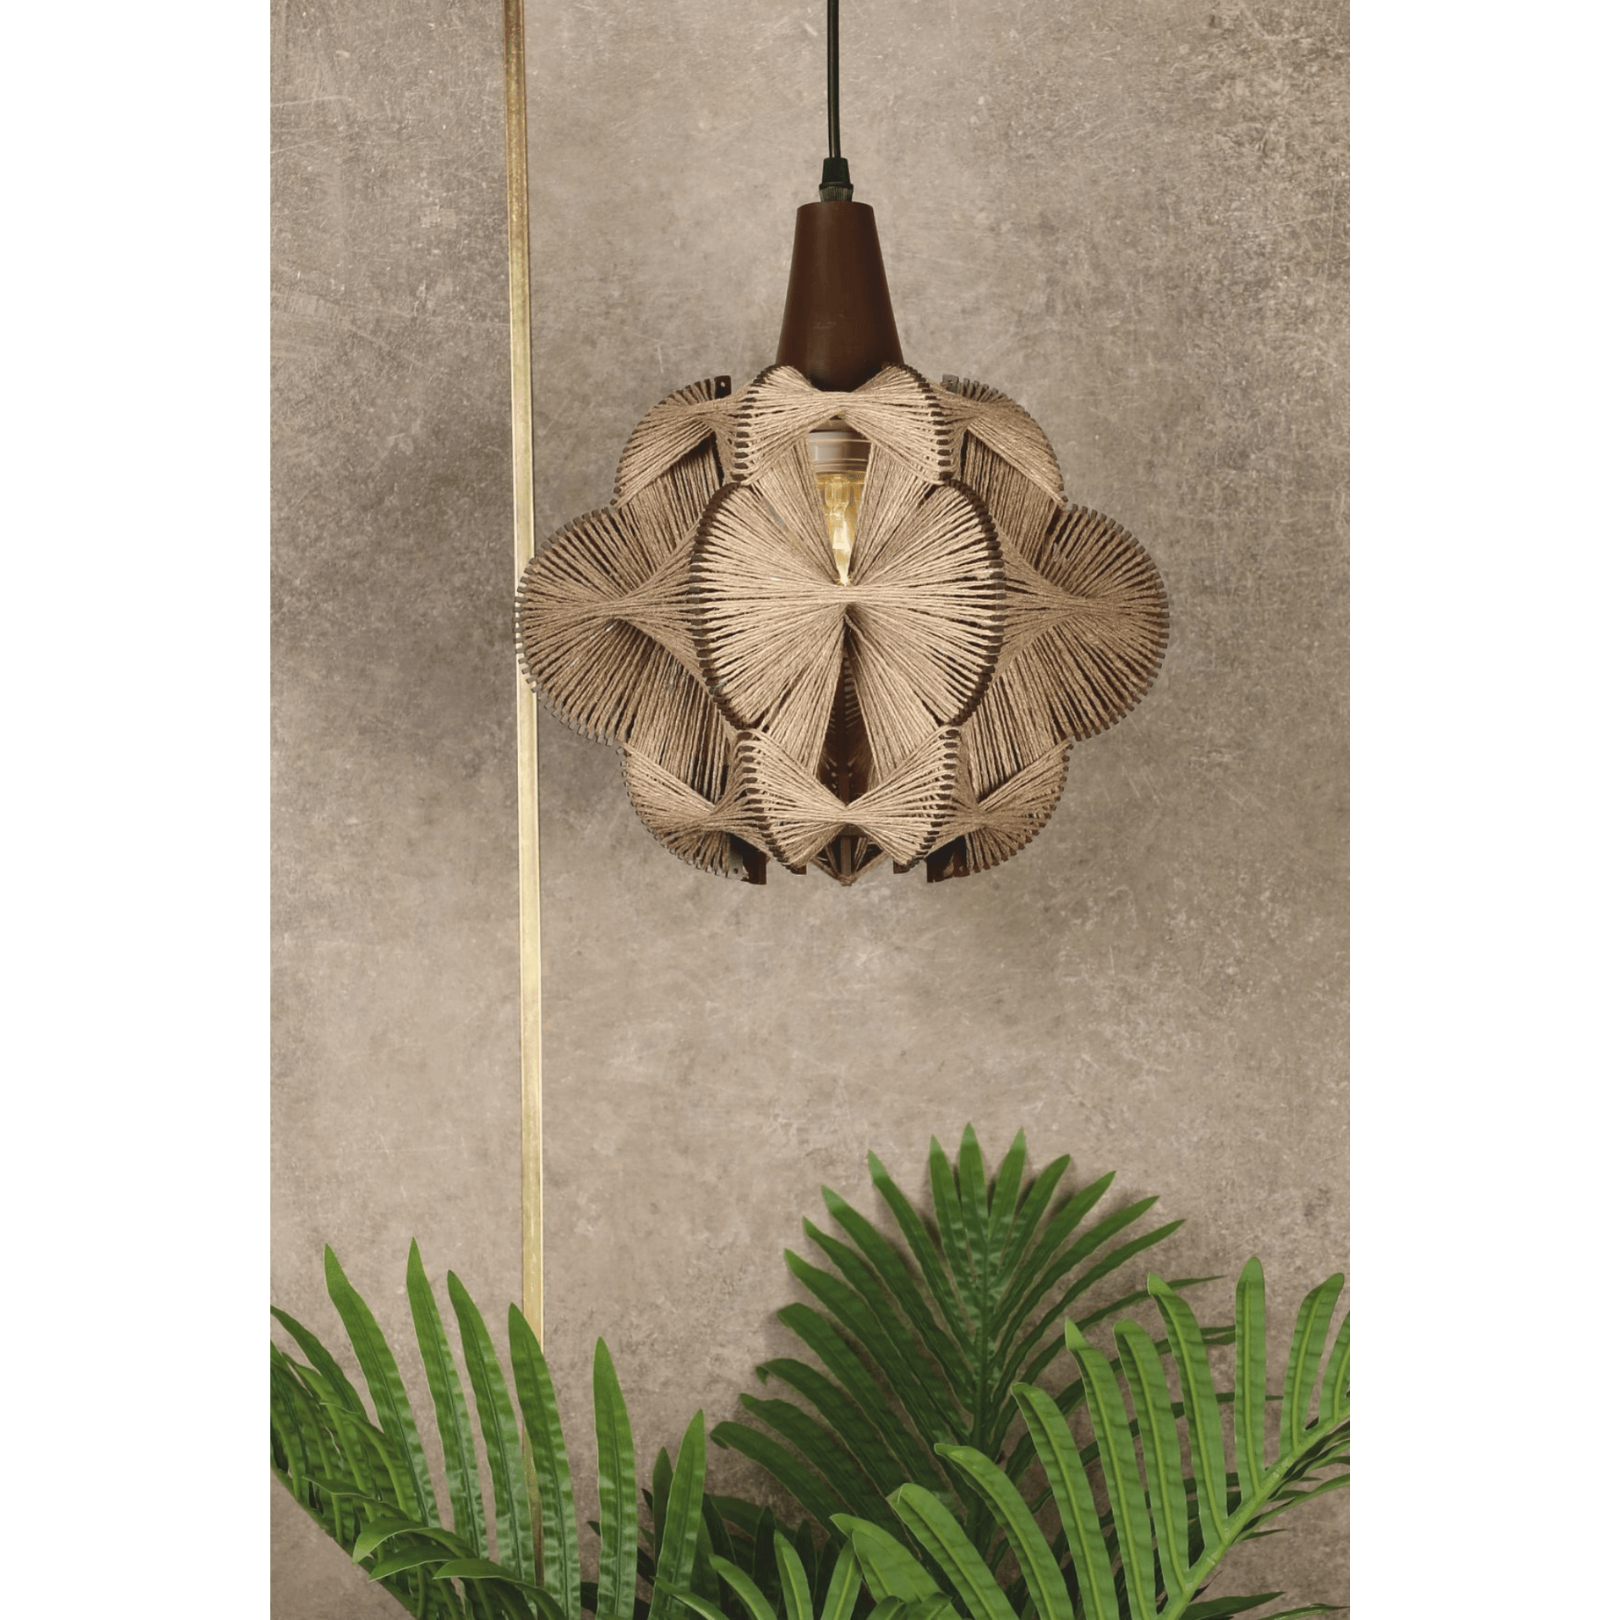 Melodia Handcrafted Pendant Light